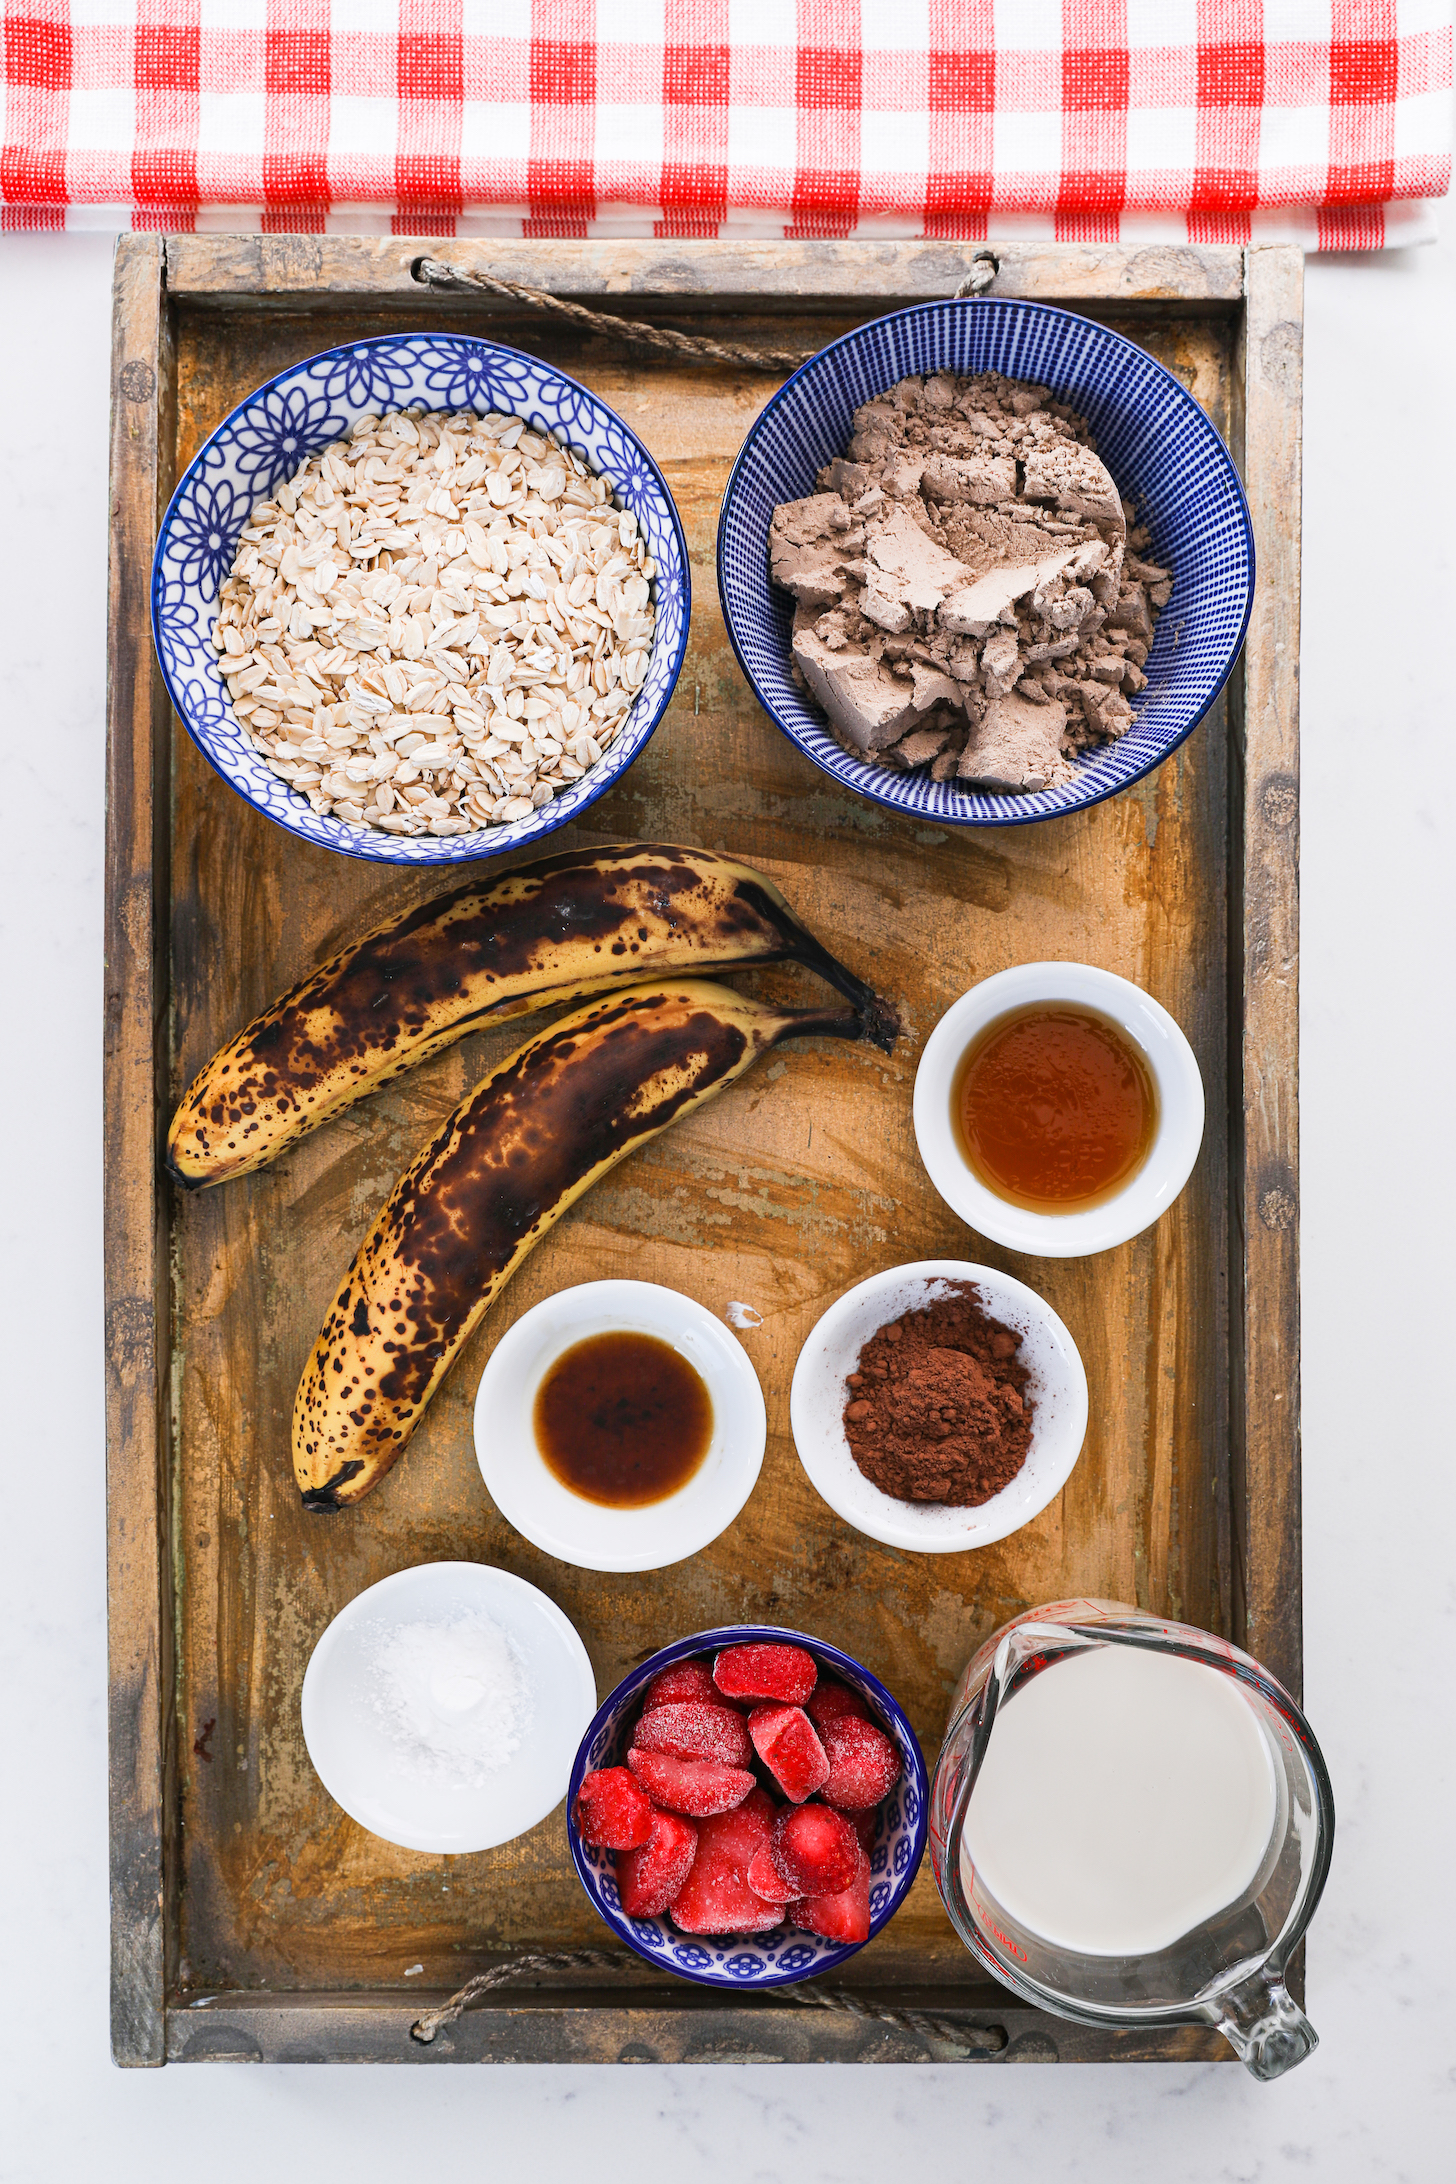 Food ingredients like bananas, oats, strawberries and millk arranged in a gold tray.